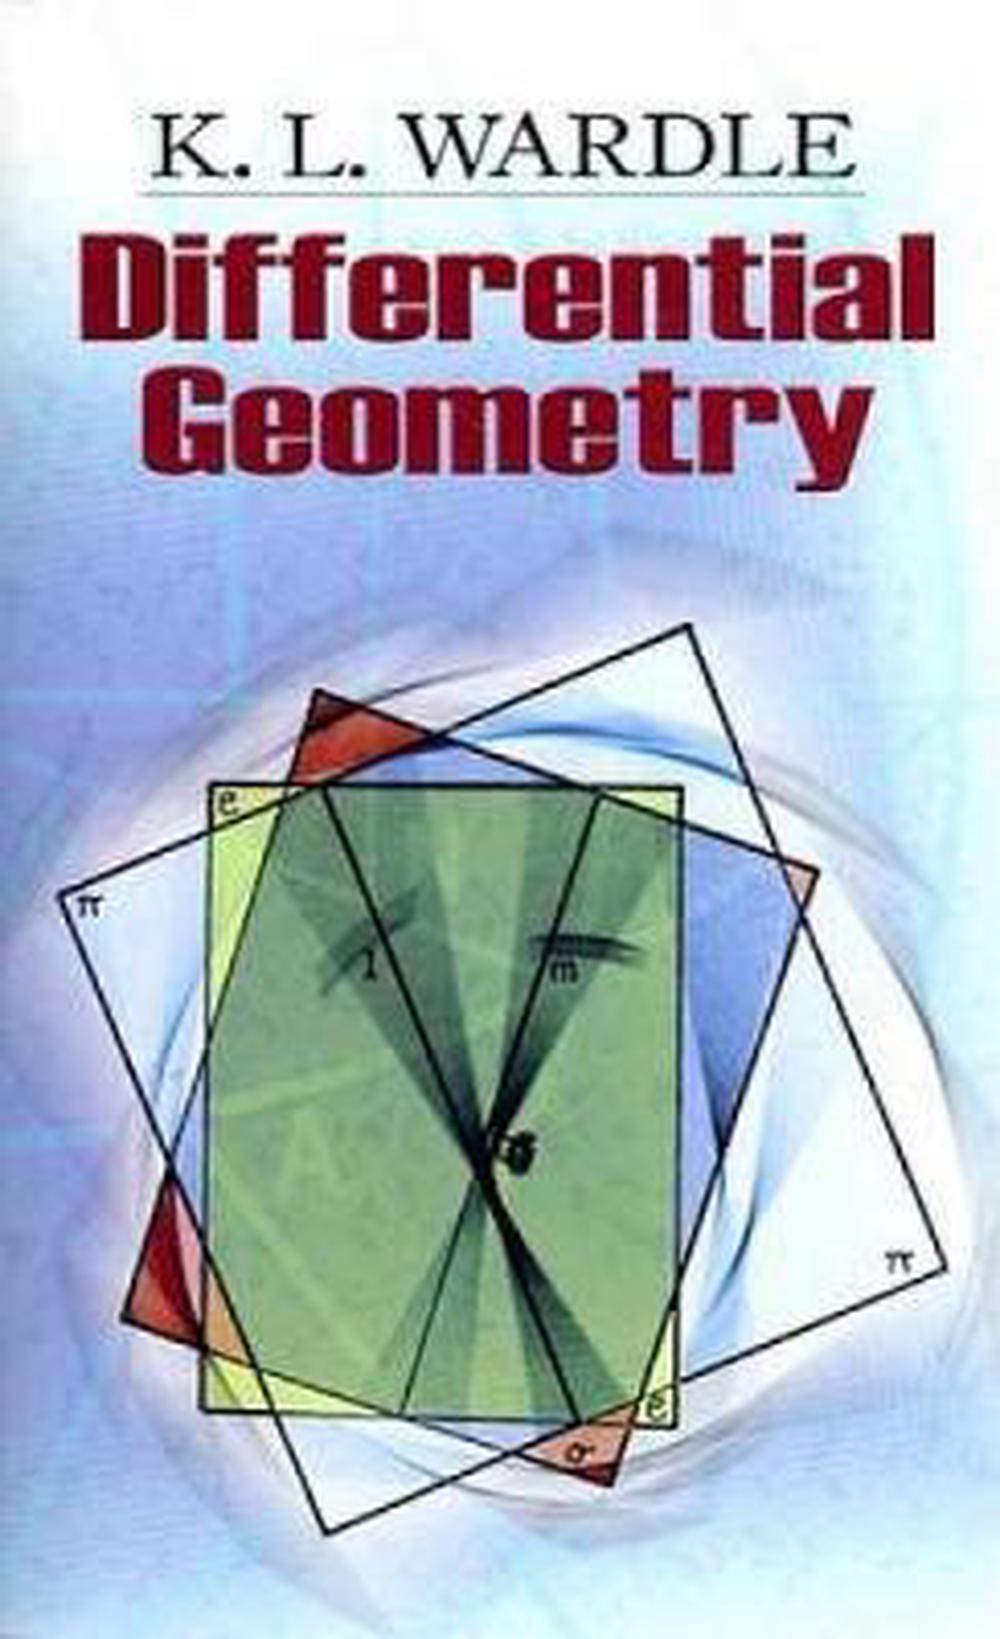 differential geometry books